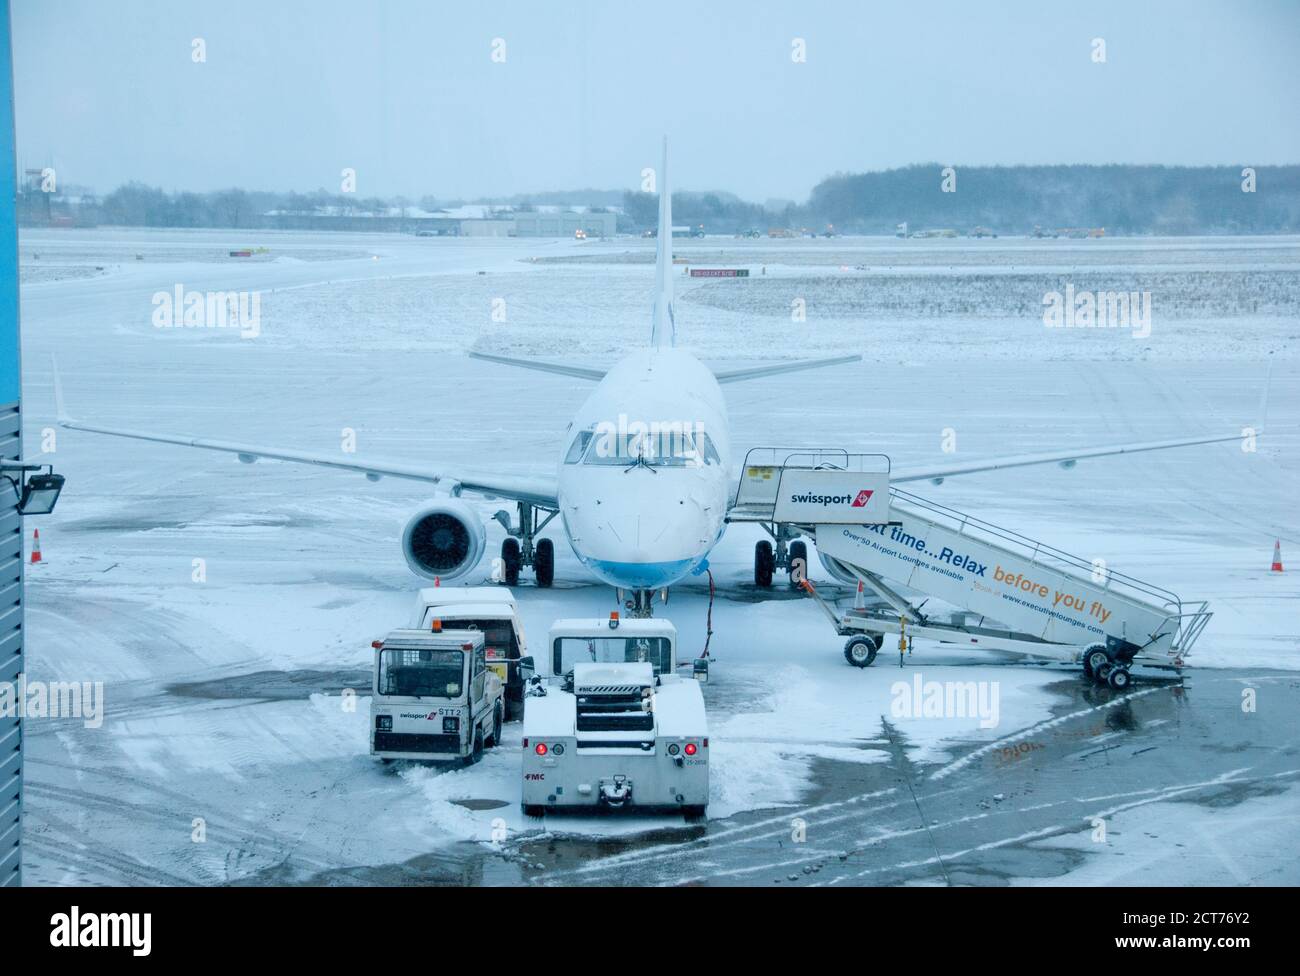 Beast from the East - Snowbound Aircraft - Doncaster Airport, Doncaster, South Yorkshire, UK Stock Photo